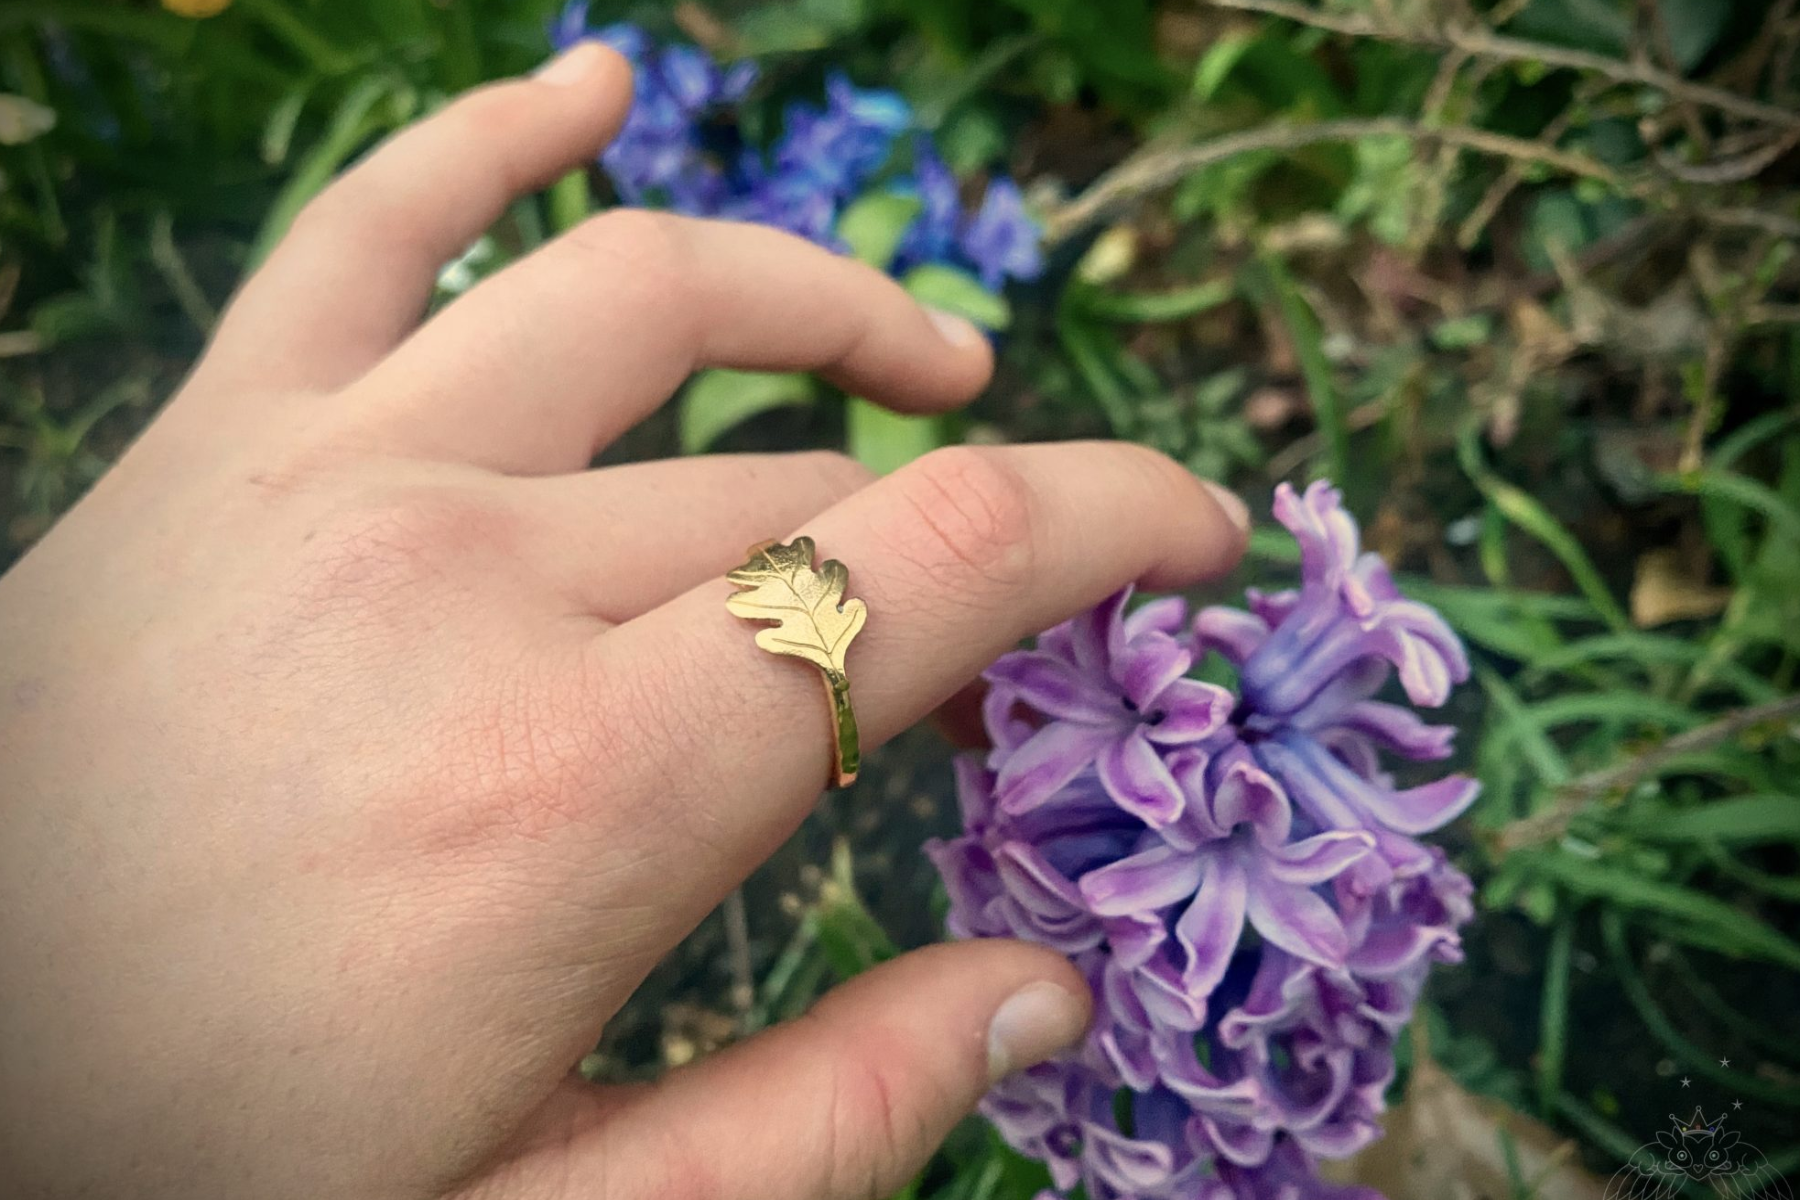 Gold leaf ring on a woman's finger holding a purple flower